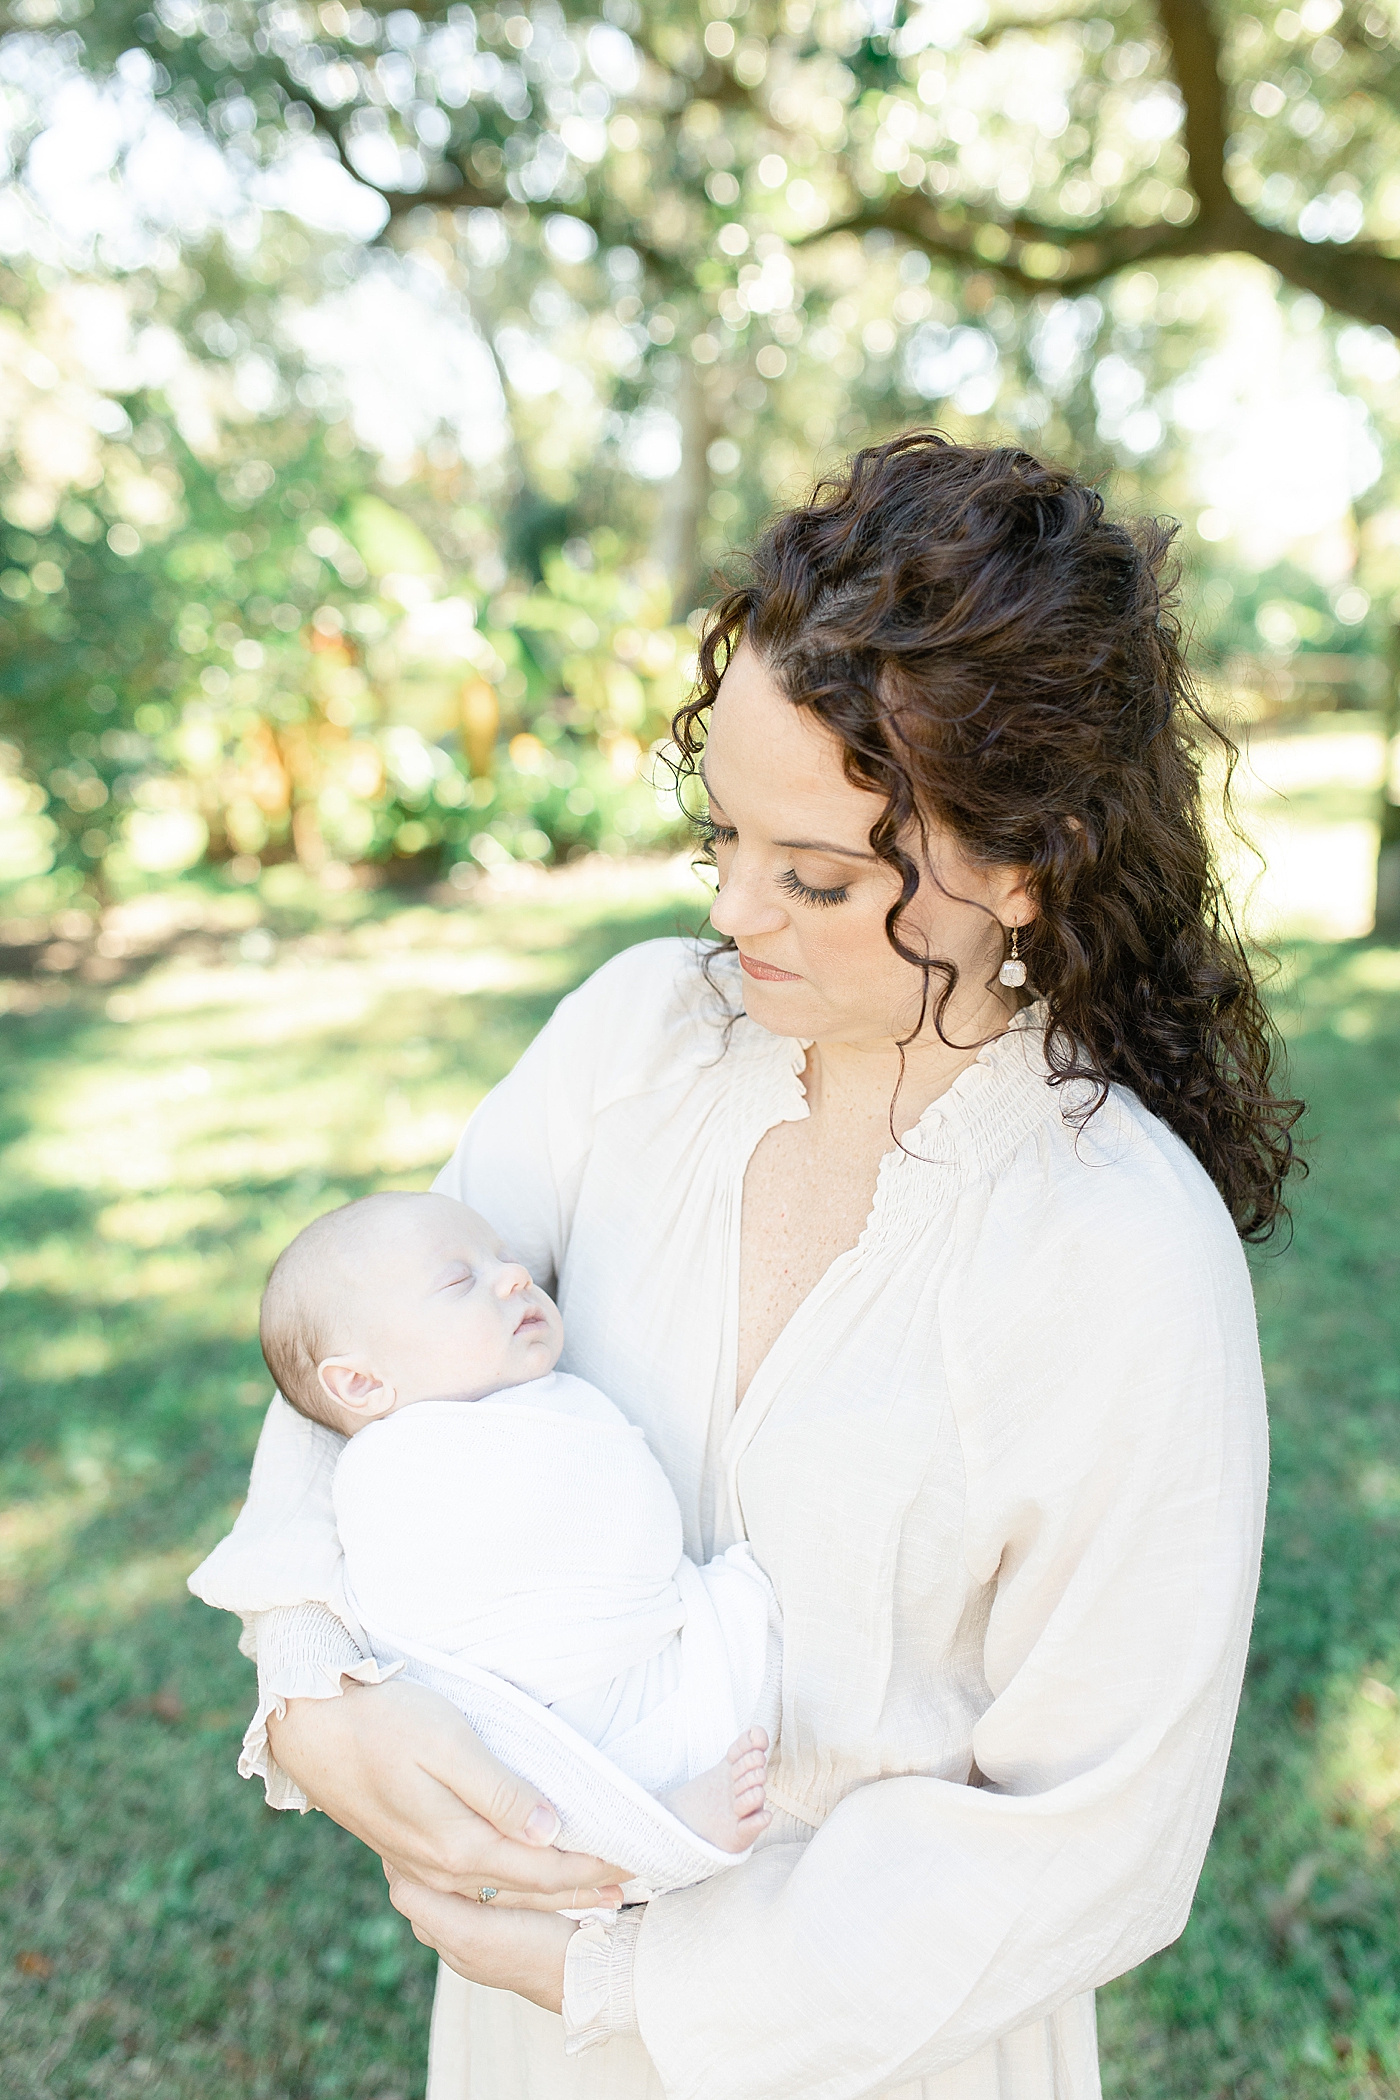 Mom in cream holding her newborn baby | Photo by Pascagoula NB photographer Little Sunshine Photography